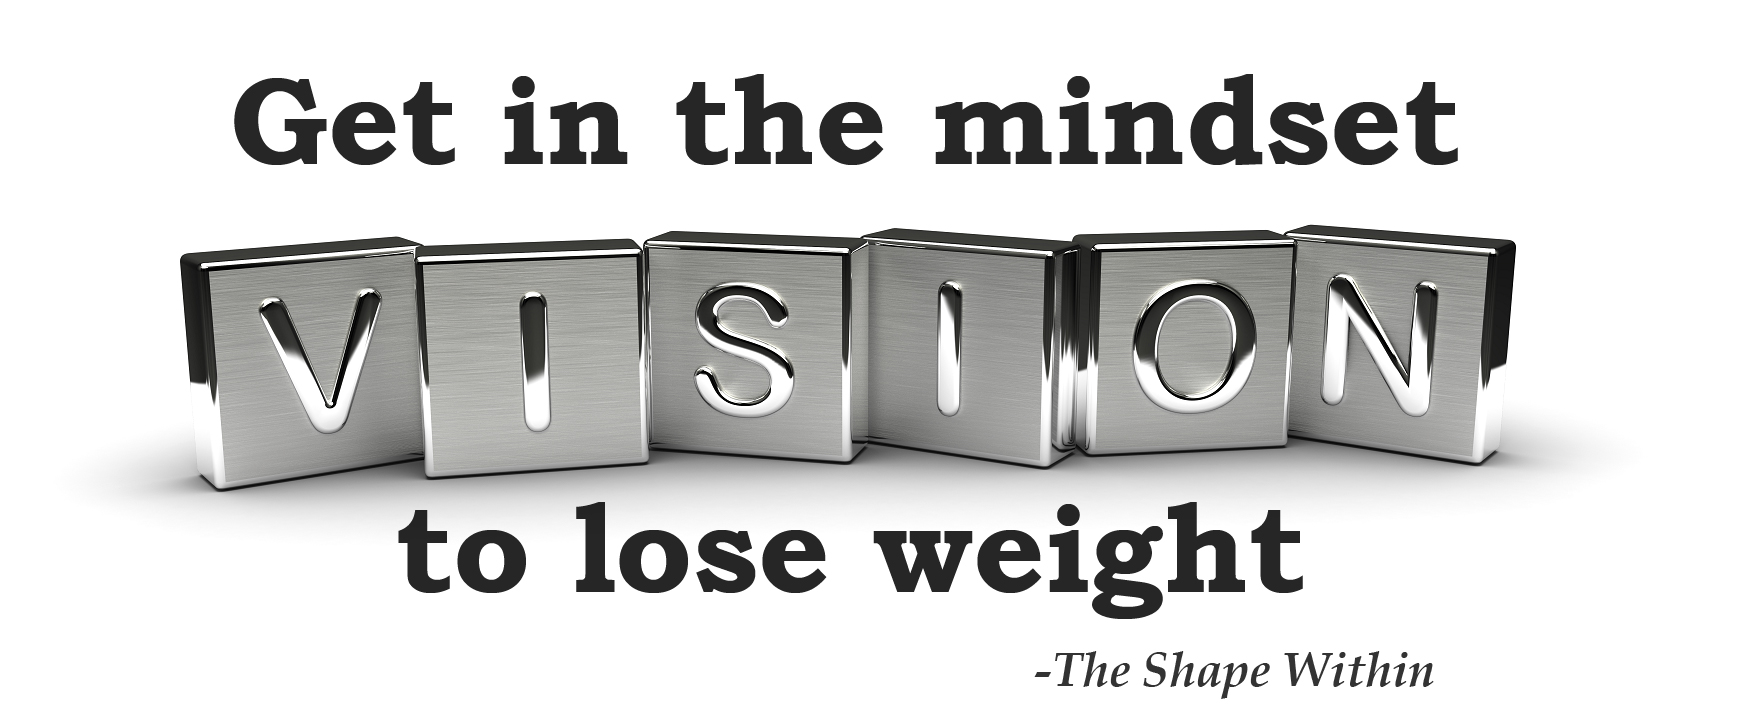 The mindset for weight loss photo, with silver letter that say, "Vision"